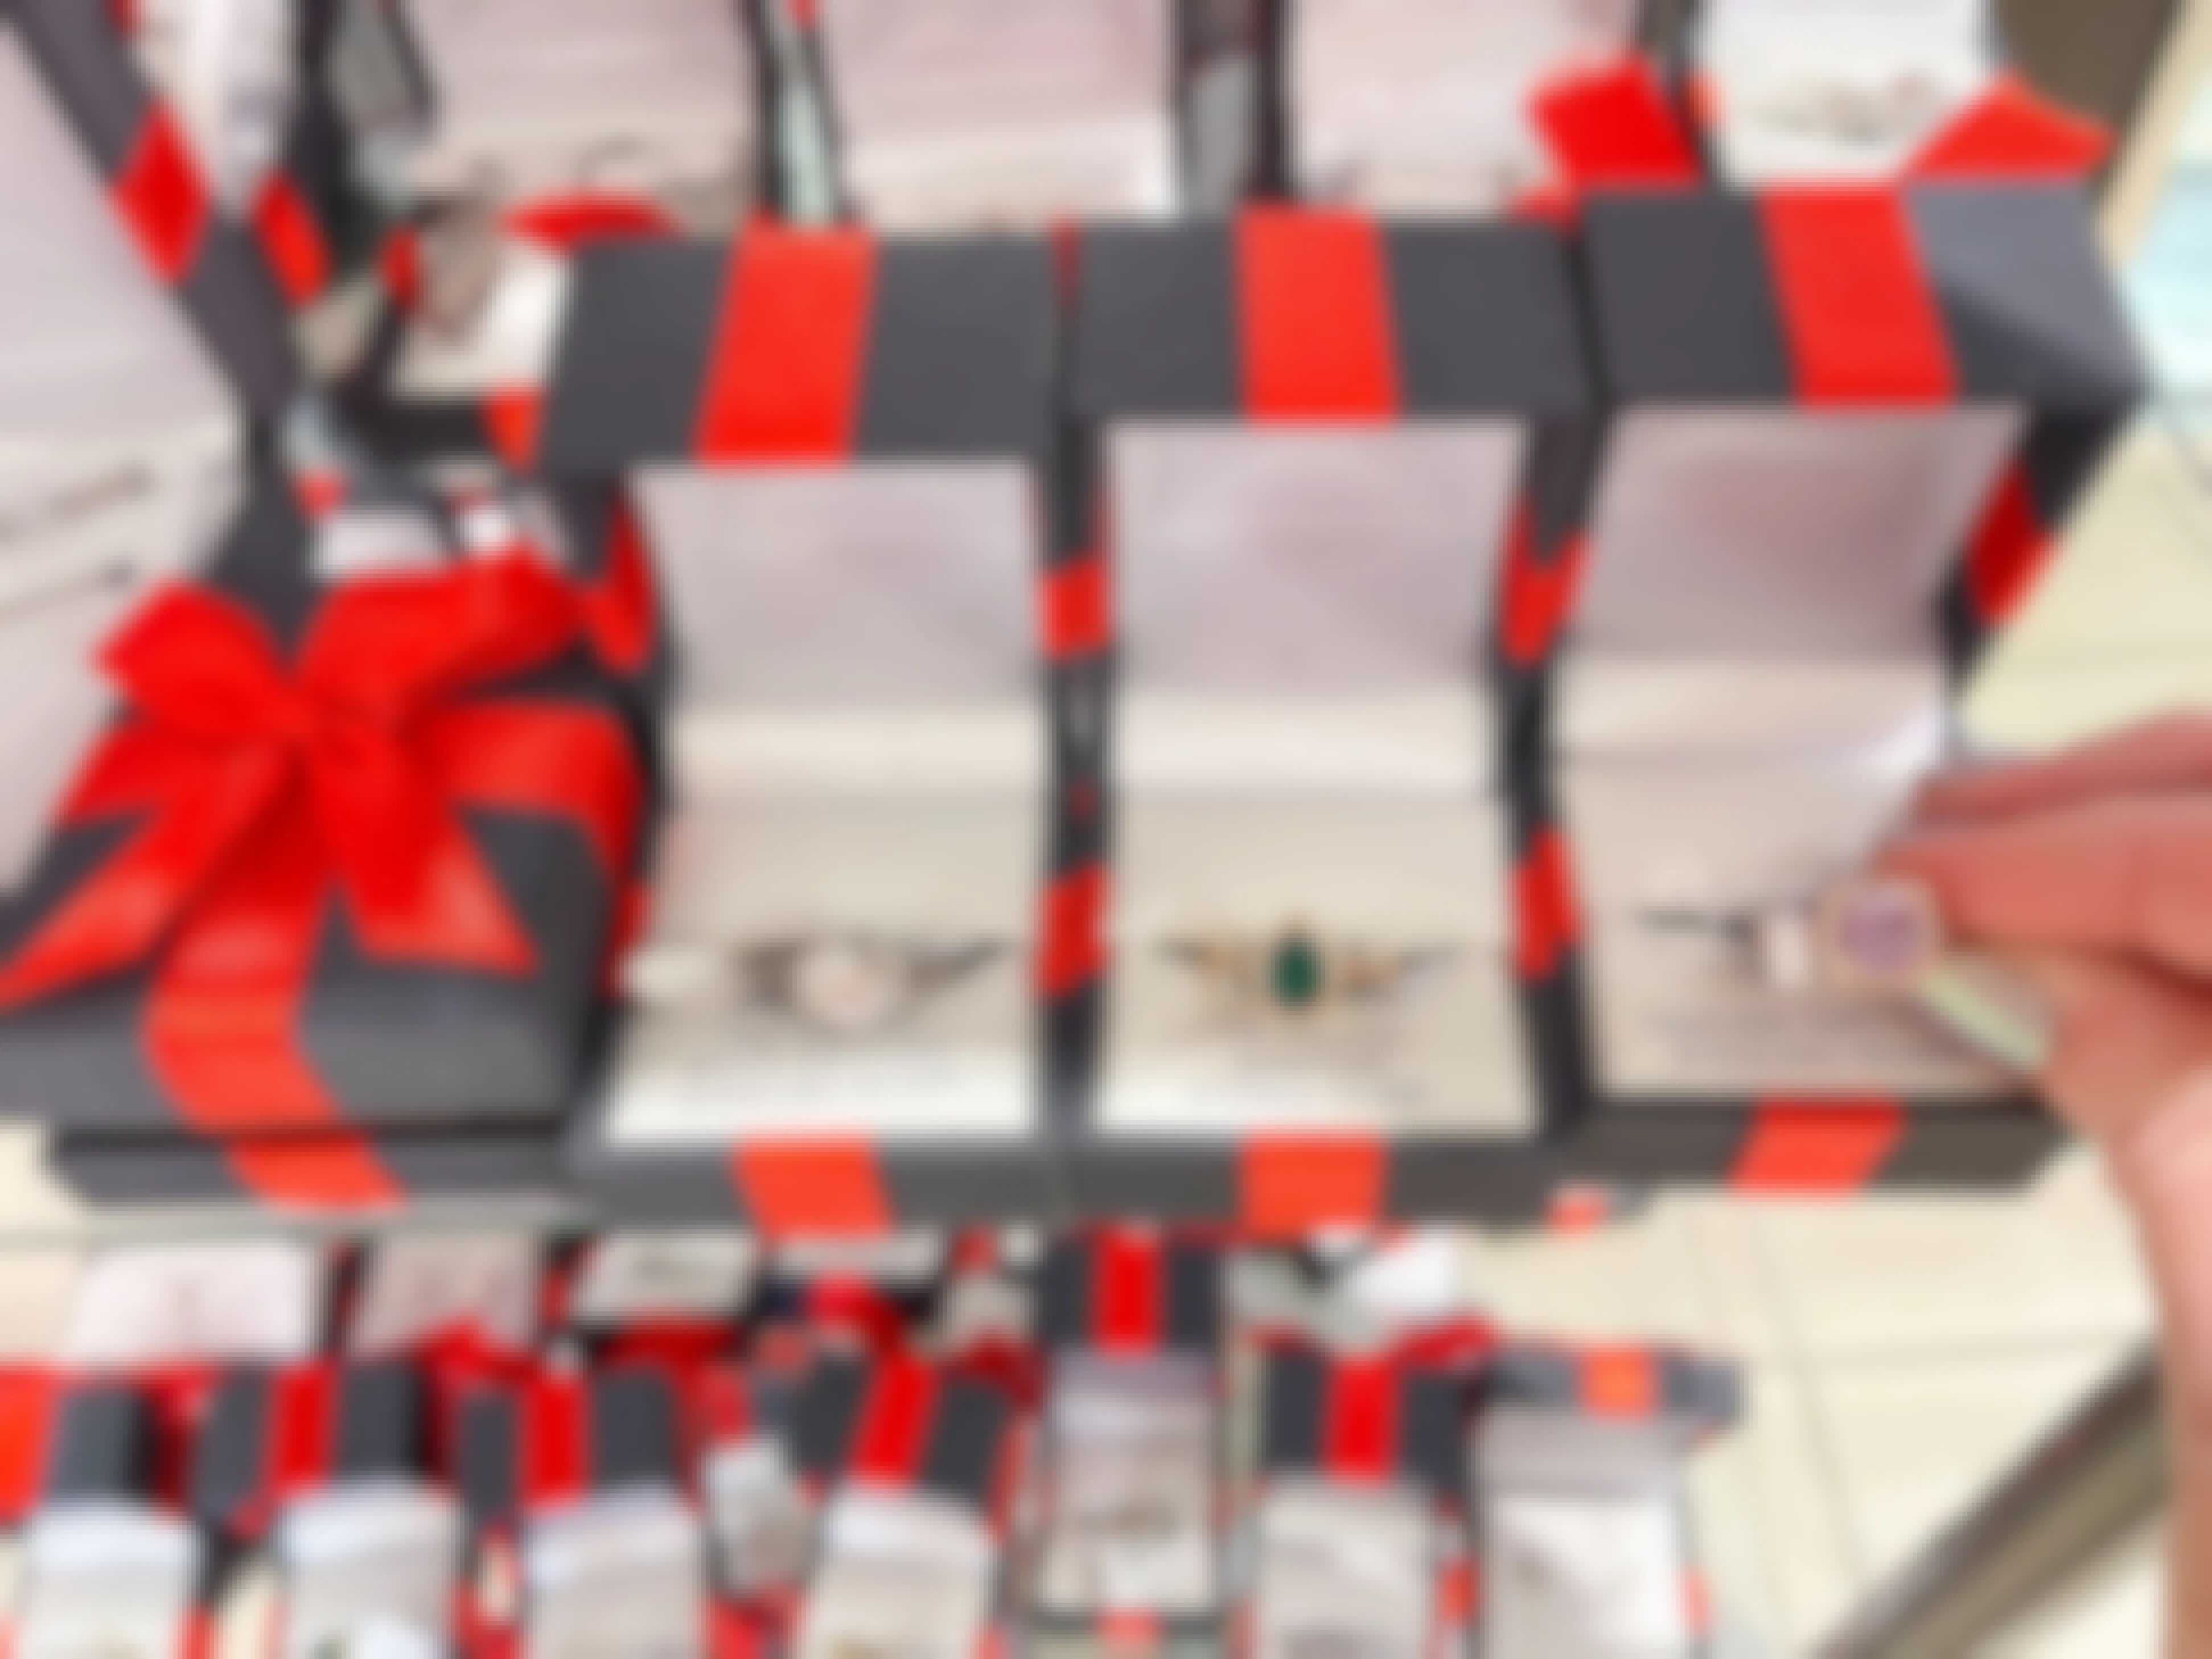 display of jewelry in red and black boxes